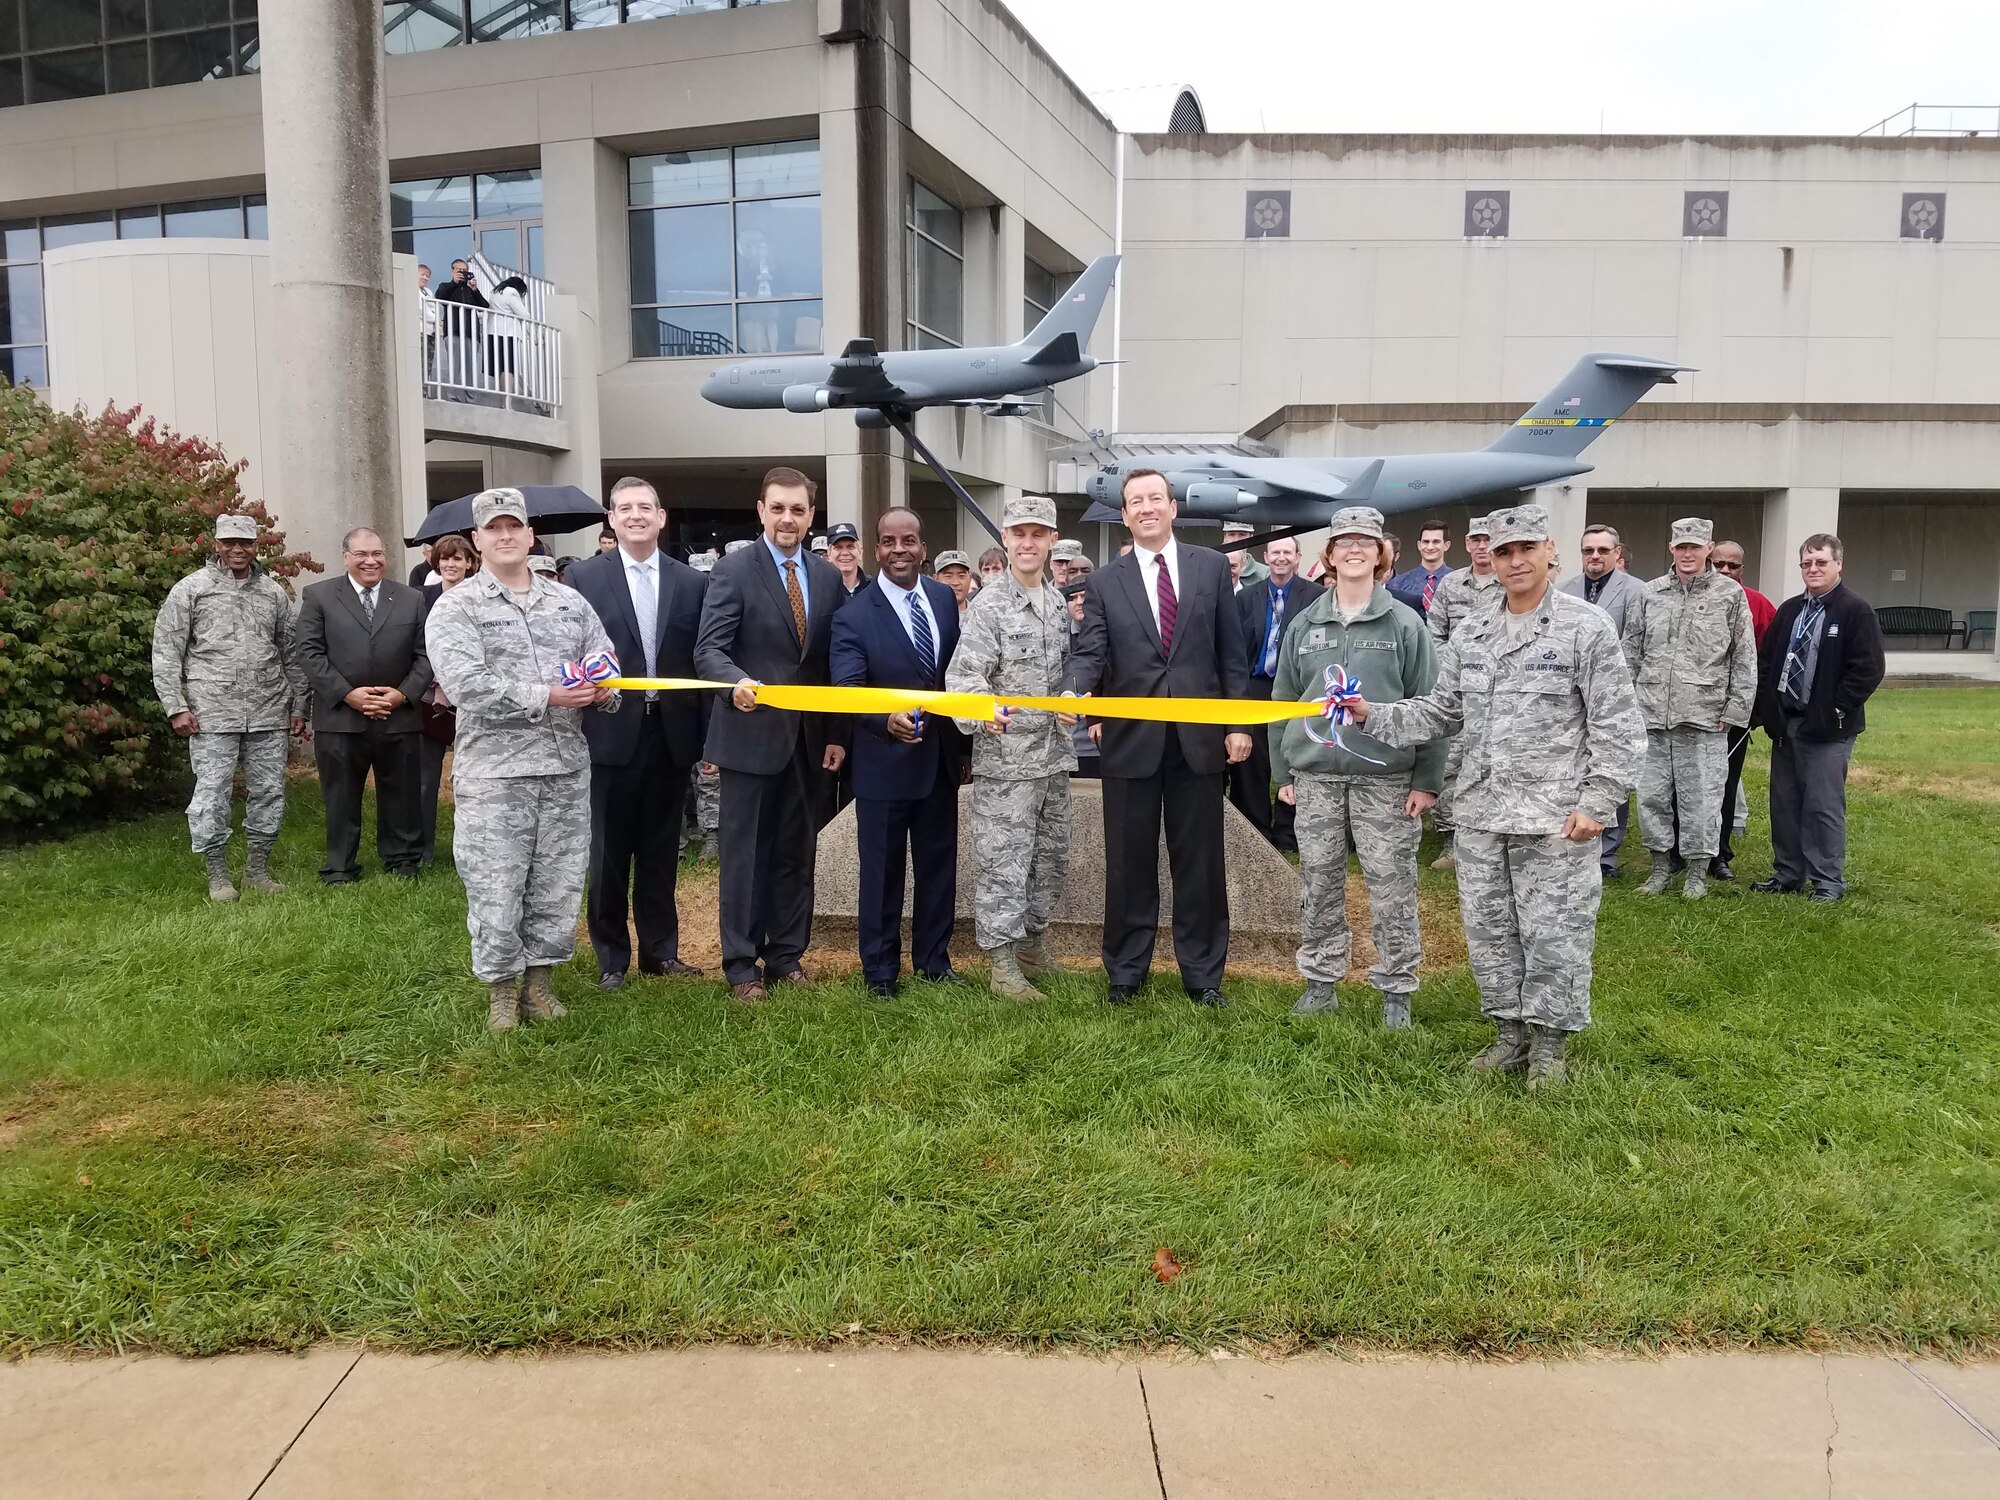 Members of the Tanker and Mobility Directorates held a joint ribbon cutting ceremony Oct. 24 to unveil a model KC-46 simulating the refueling of a C-17 model. The model aircraft was donated by the Boeing Company. (U.S. Air Force photo / Brian Brackens)